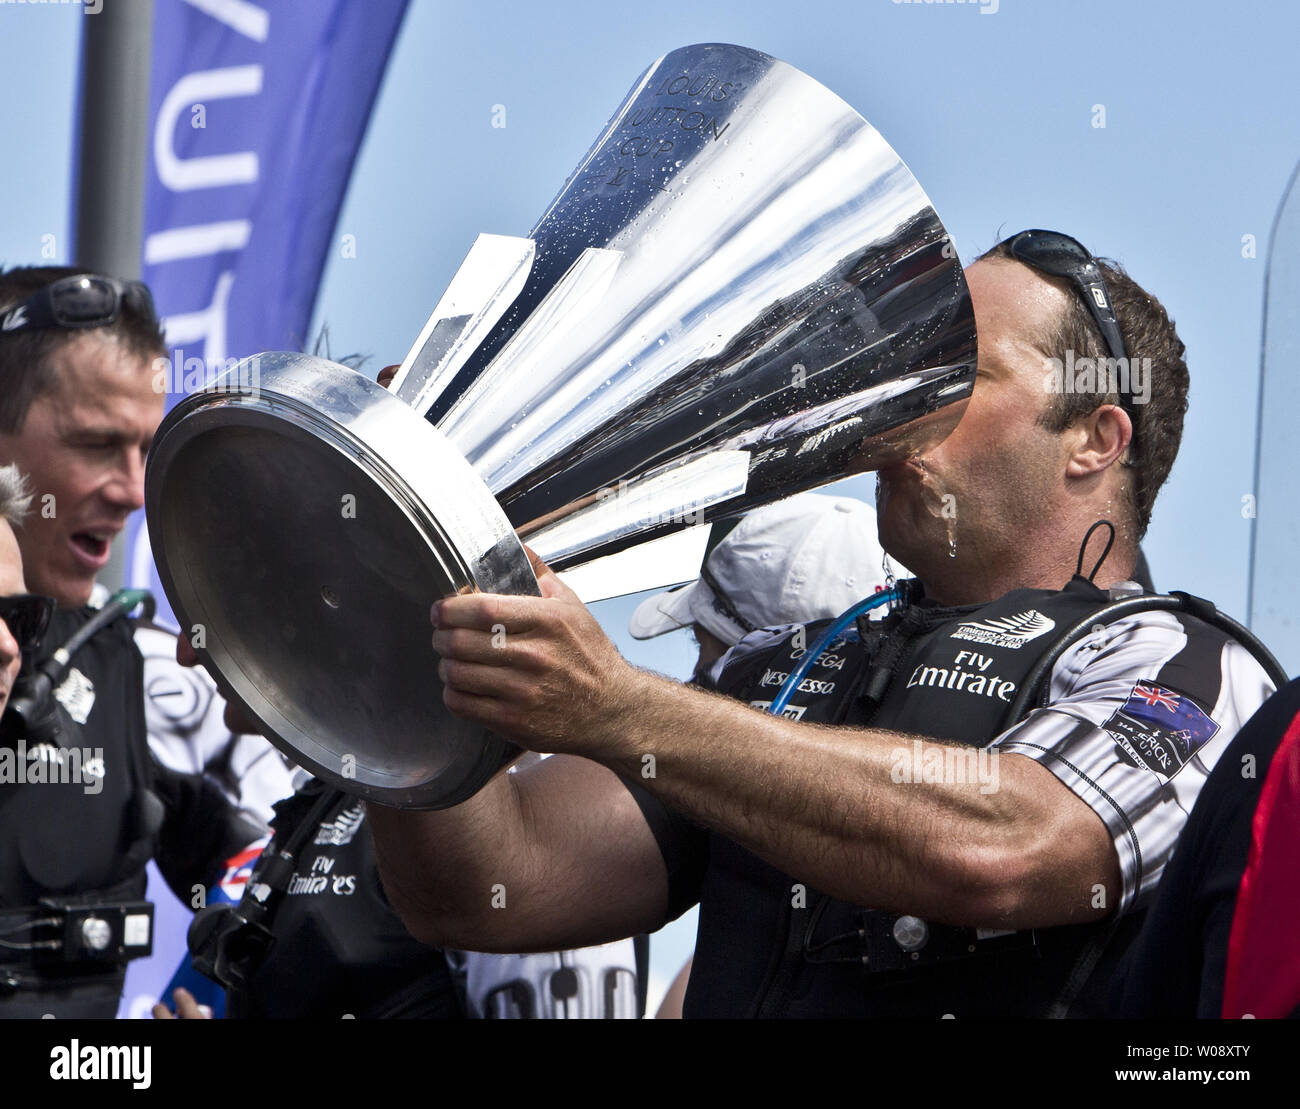 A crew member of Emirates New Zealand drinks champagne from the Louis Vuitton Cup after defeating Italy's Luna Rossa Challenge in San Francisco on August 25, 2013.  The Kiwis won the best of 13 series 7-1 to win the cup and move on to race Oracle Team USA in the America's Cup.     UPI/Terry Schmitt Stock Photo